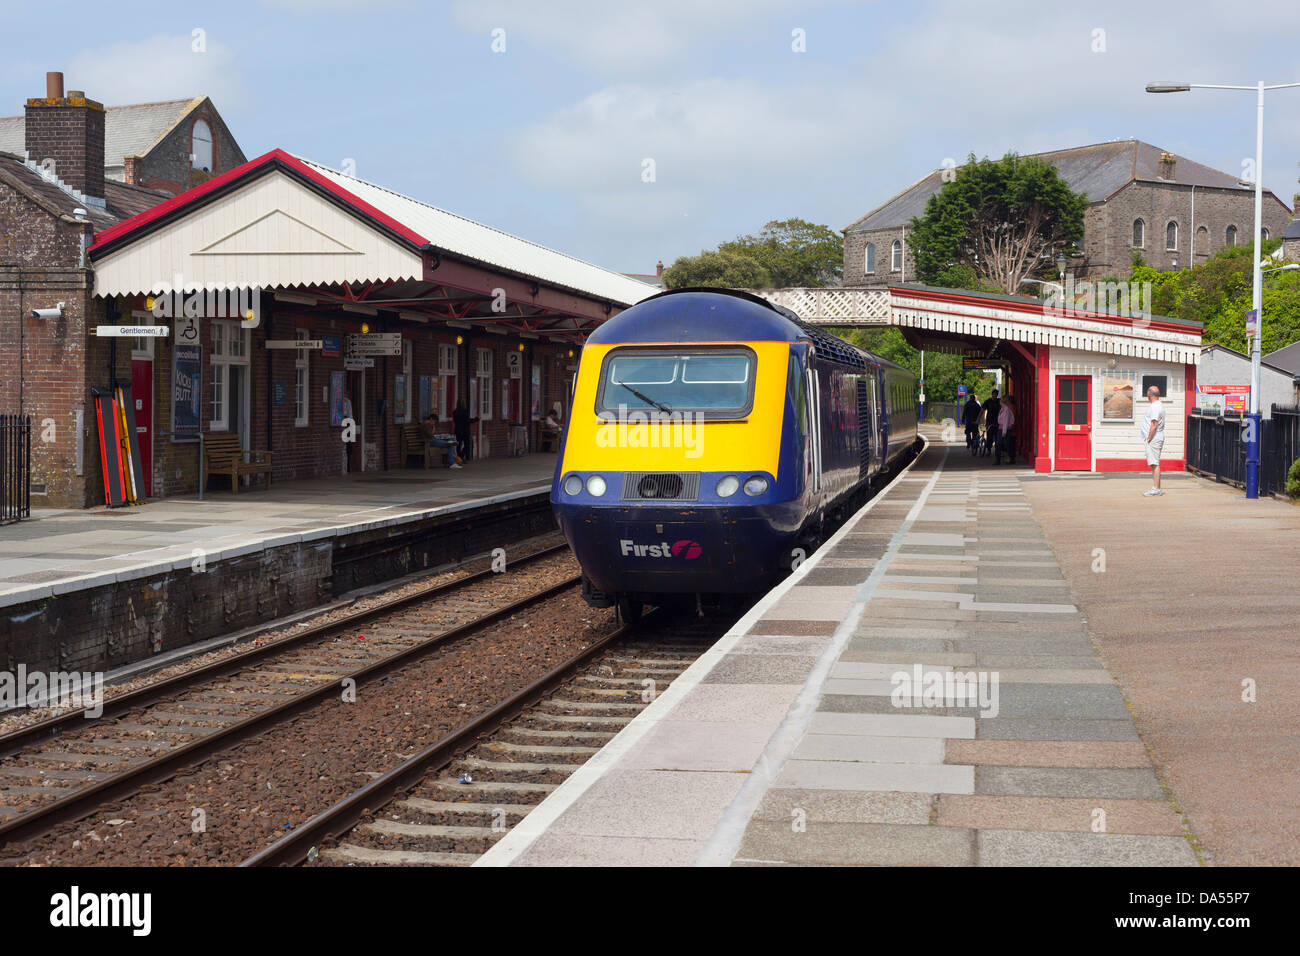 Redruth railway station, Cornwall England.  First Great Western high speed train from London to Penzance. Stock Photo